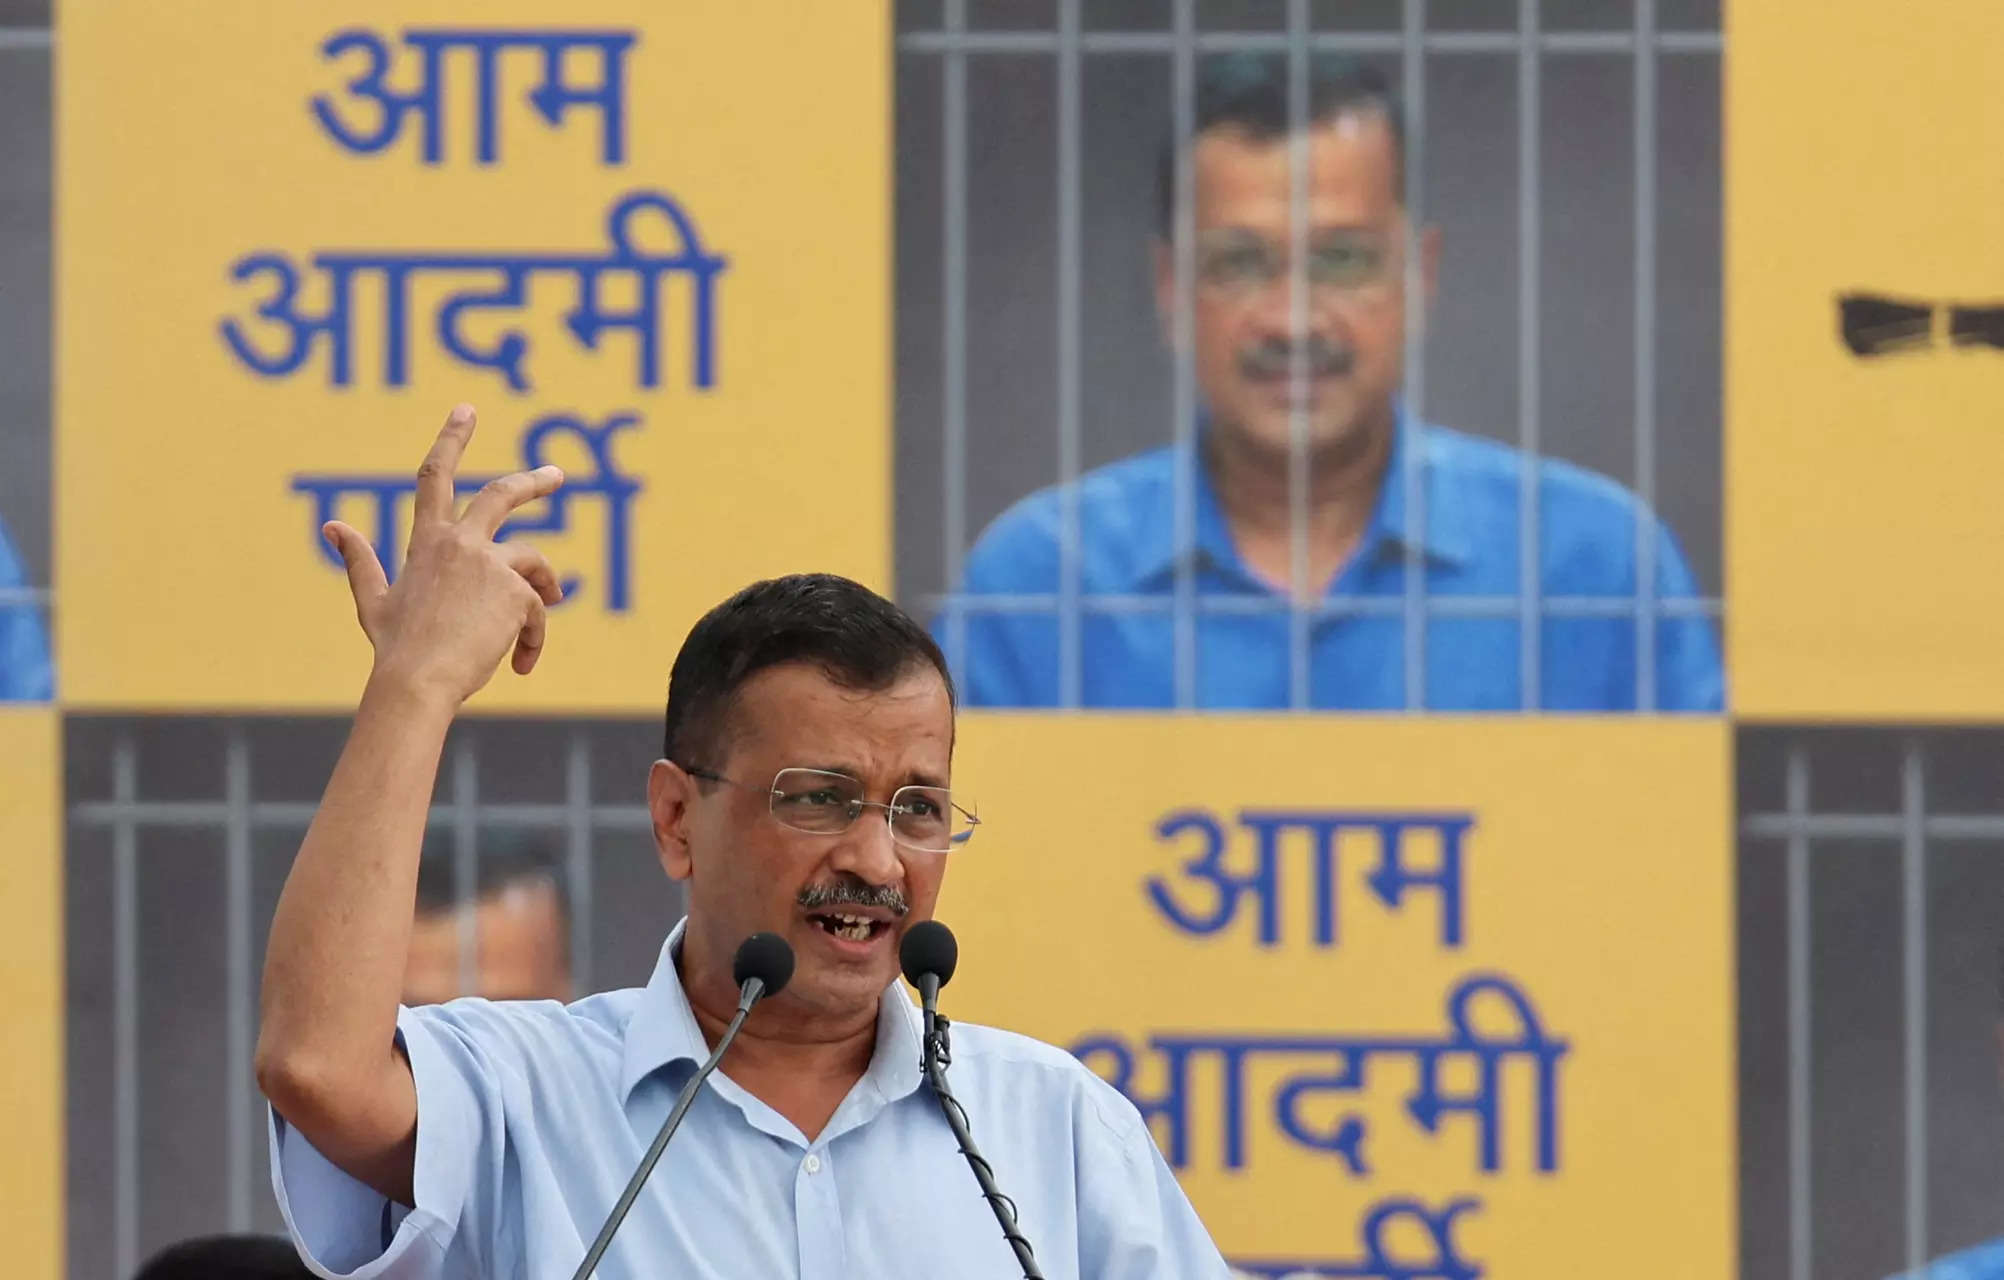 INDIA bloc rally on July 30 over Kejriwal's declining health in jail: AAP 